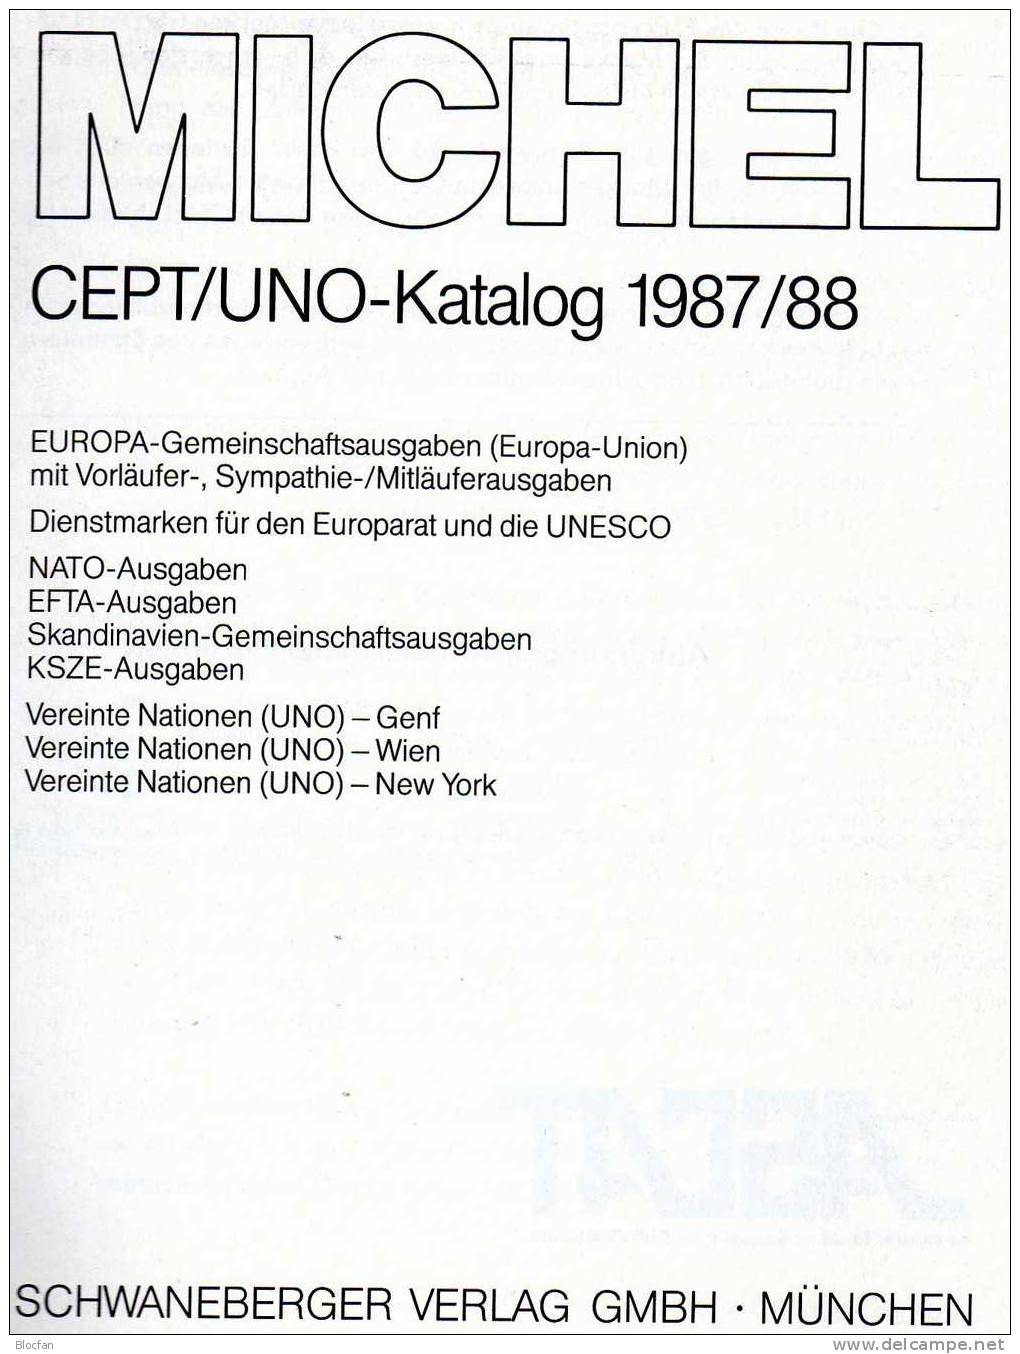 CEPT/UNO Michel Katalog 1987 Europa-Motiv Antiquarisch 8€ EUROPE Stamps Catalogue Of The Country /topics UN Genf Wien NY - Francia